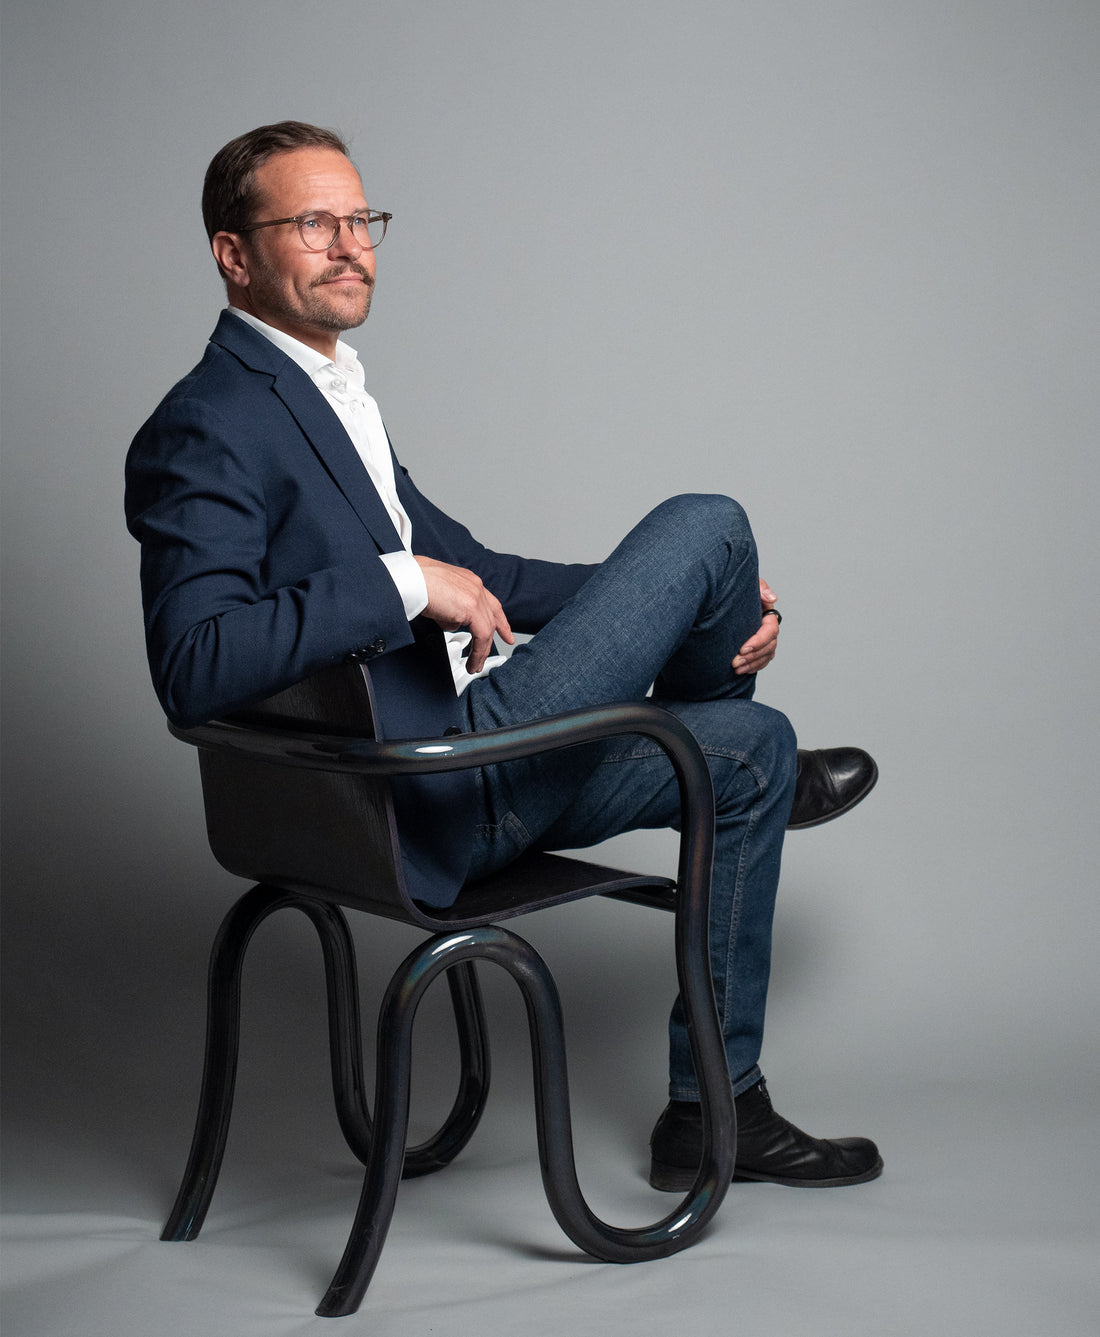 Made by Choice Appoints Antti Olin as New CEO